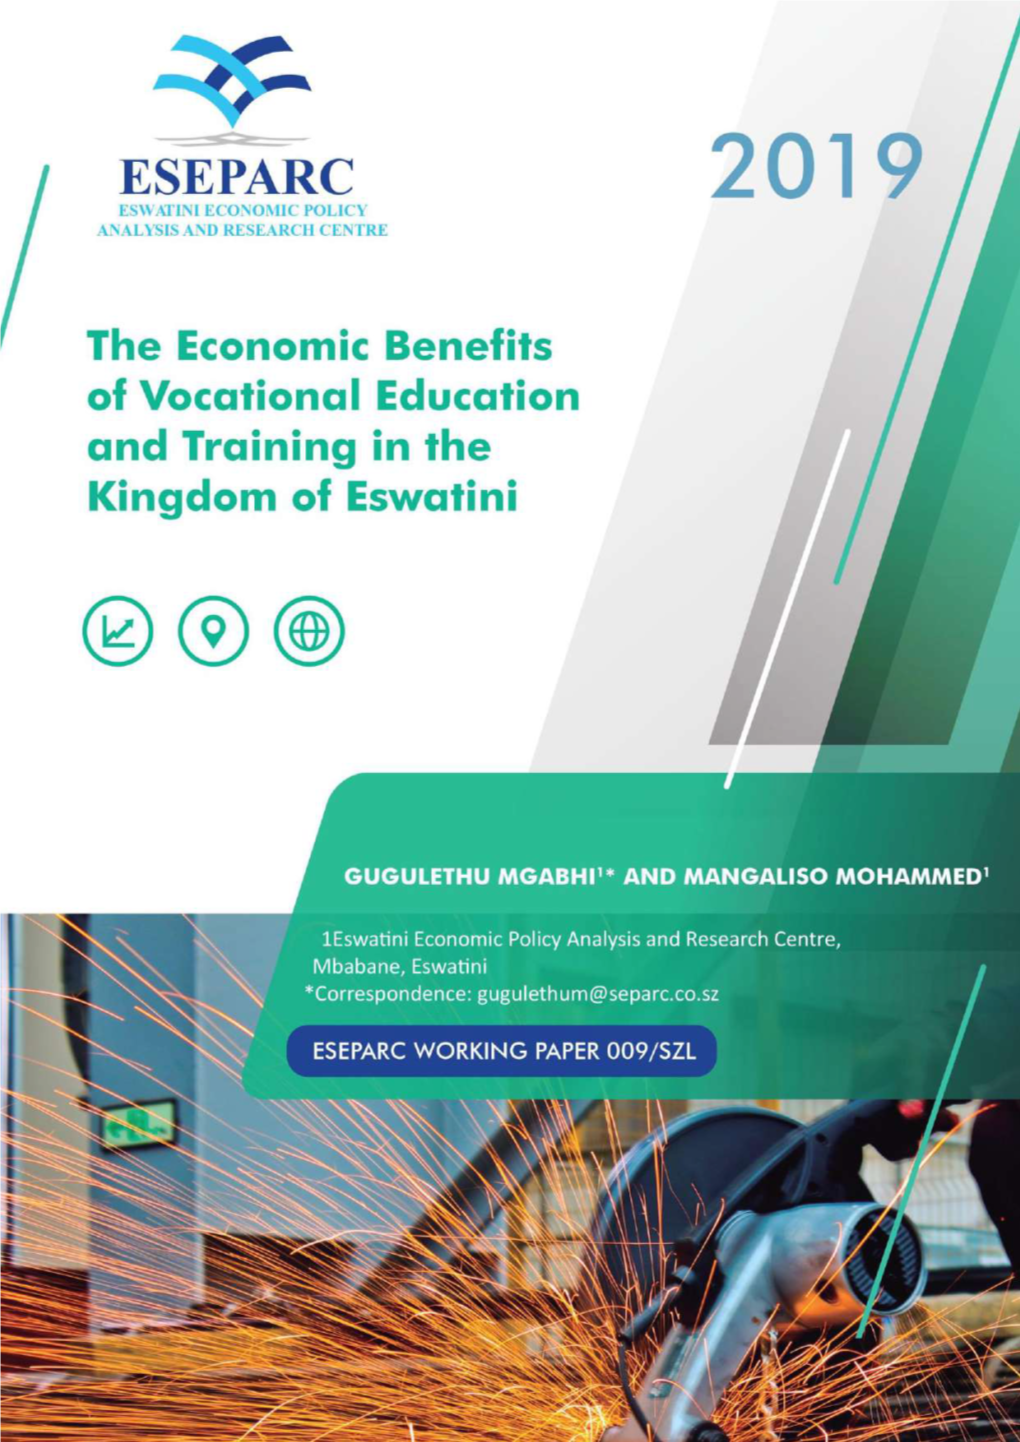 The Economic Benefits of Vocational Education and Training in the Kingdom of Eswatini